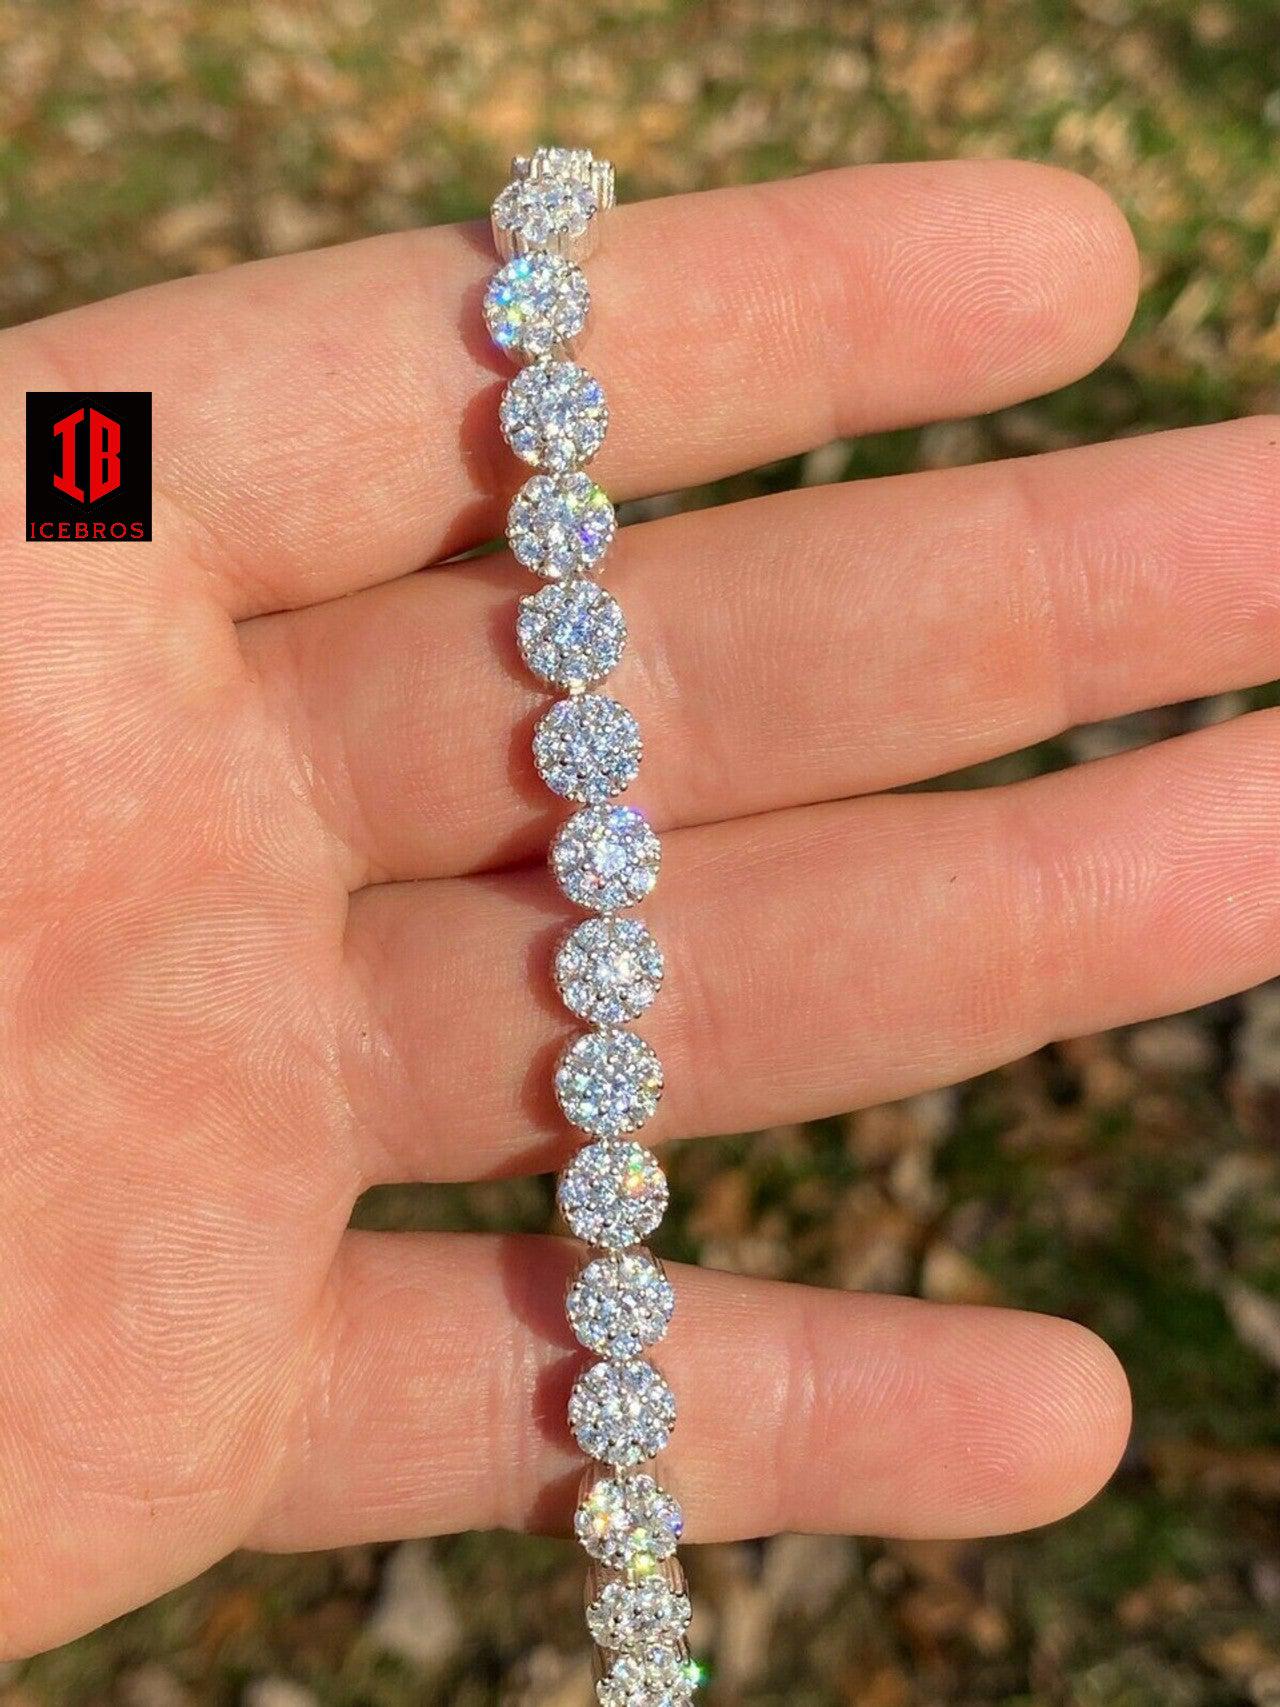 Real Solid 925 Sterling Silver Mens Iced Flooded Out Cluster Tennis Bracelet 7mm